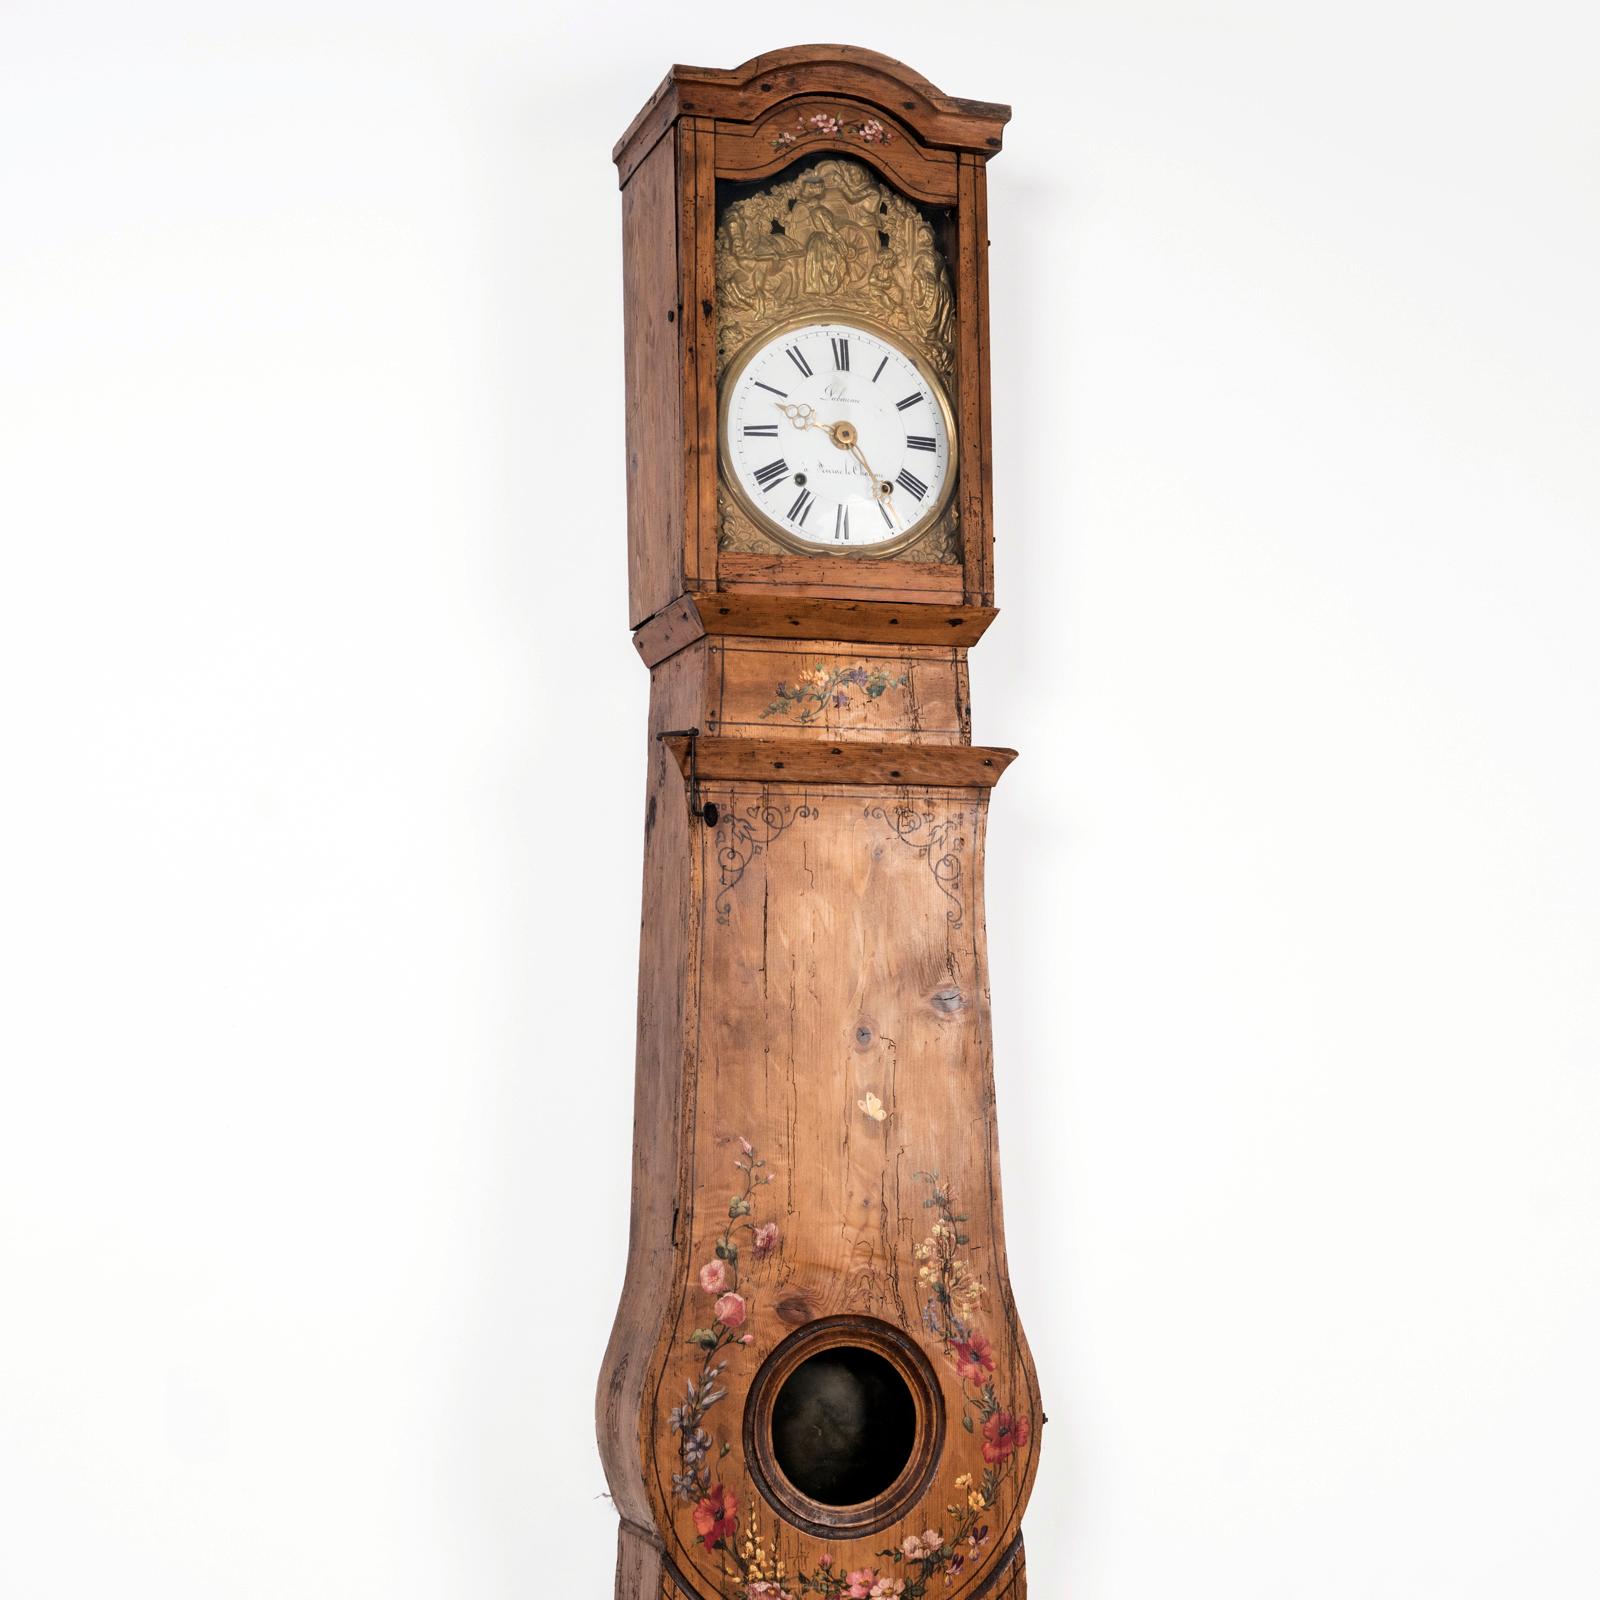 Very decorative and charming French tall case clock featuring a painted pine case adorned with floral decorations.

The porcelain clock dial bears the signature 